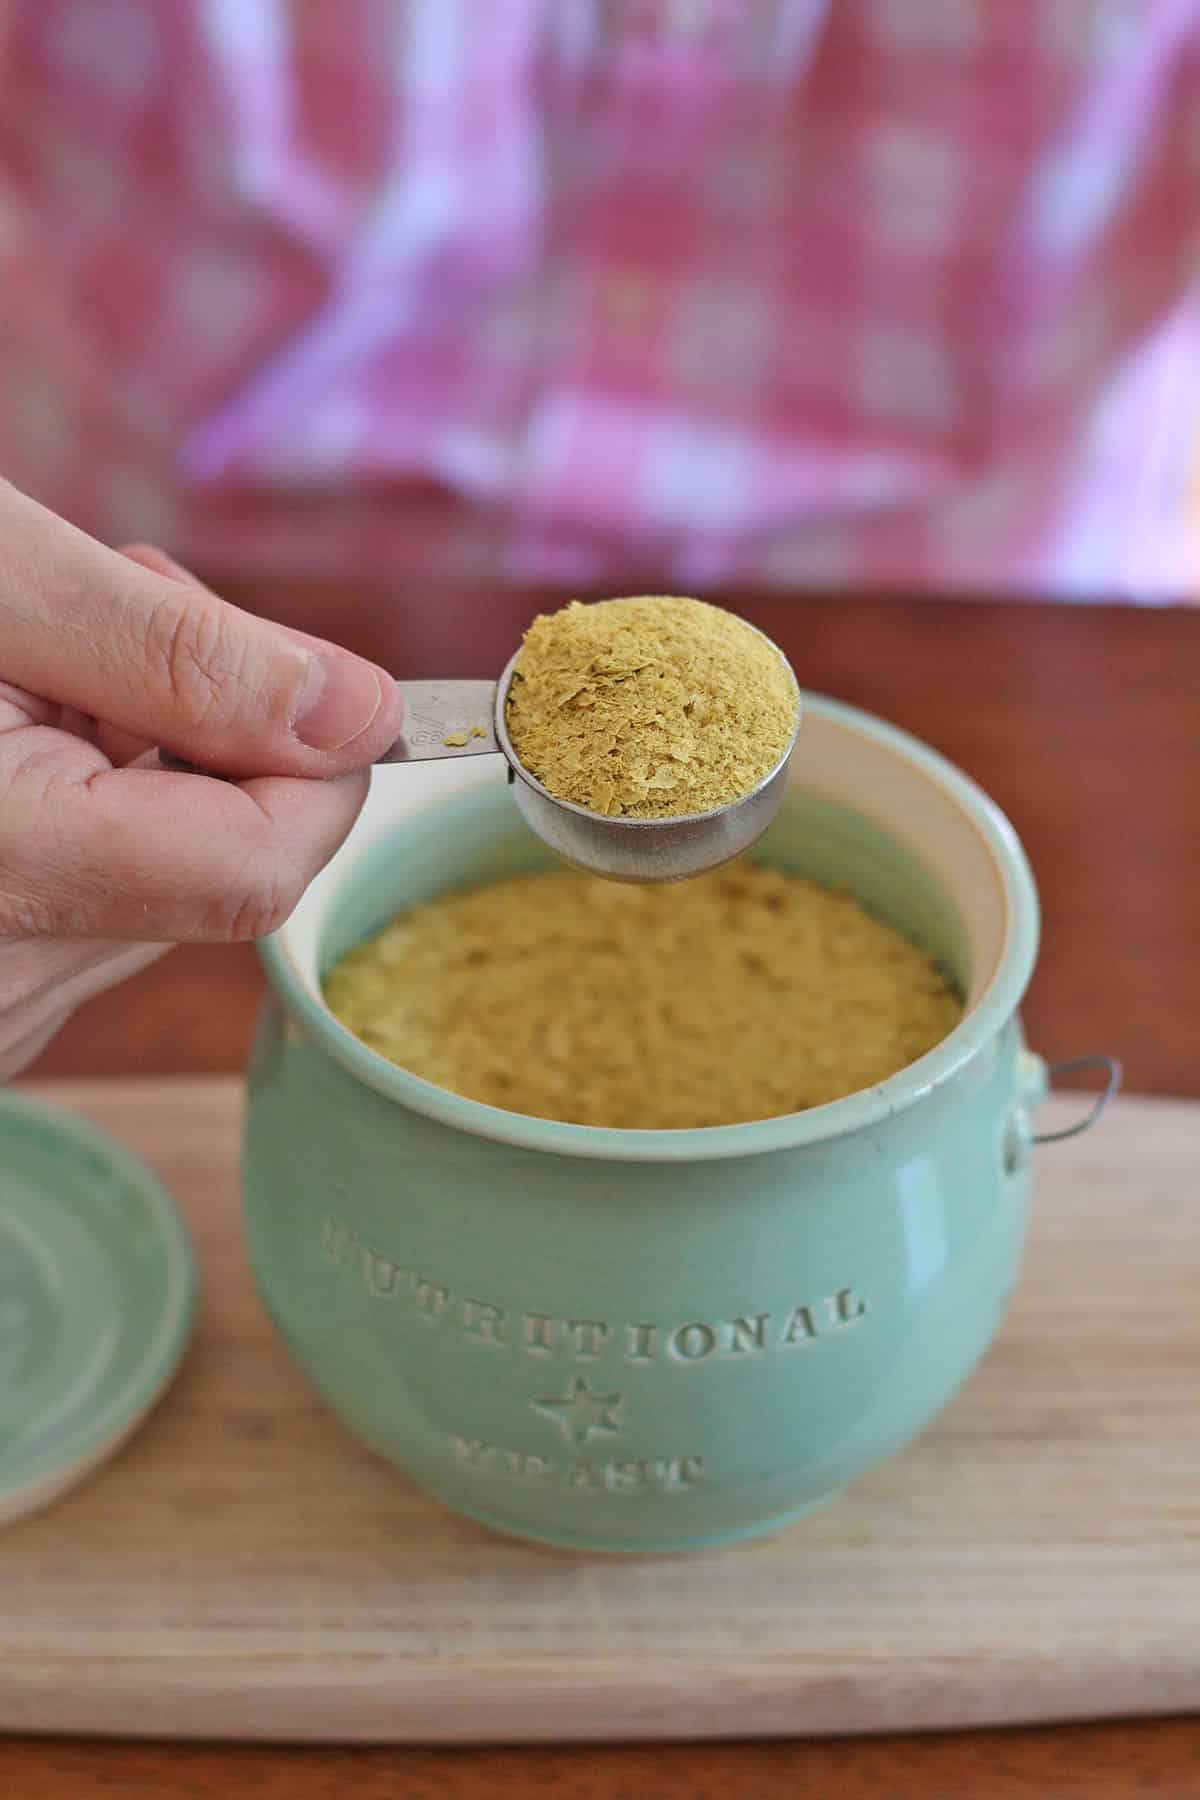 Measuring cup of nutritional yeast over jar.